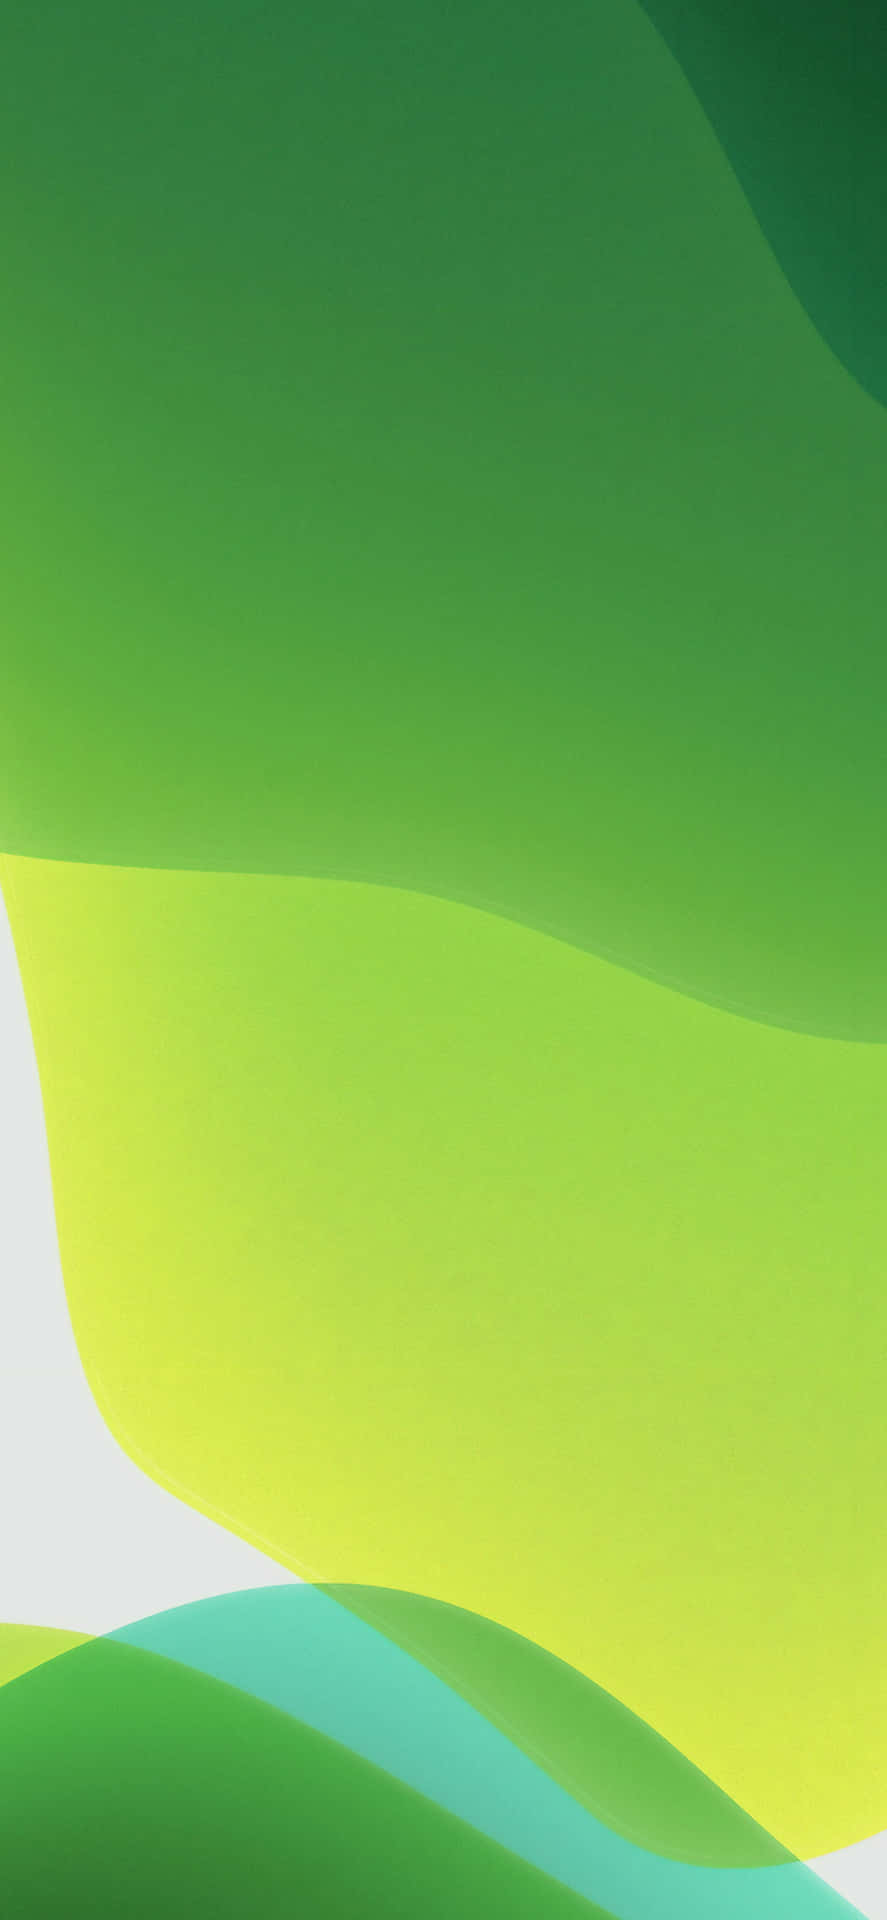 iOS 13 White With Yellow And Green Background